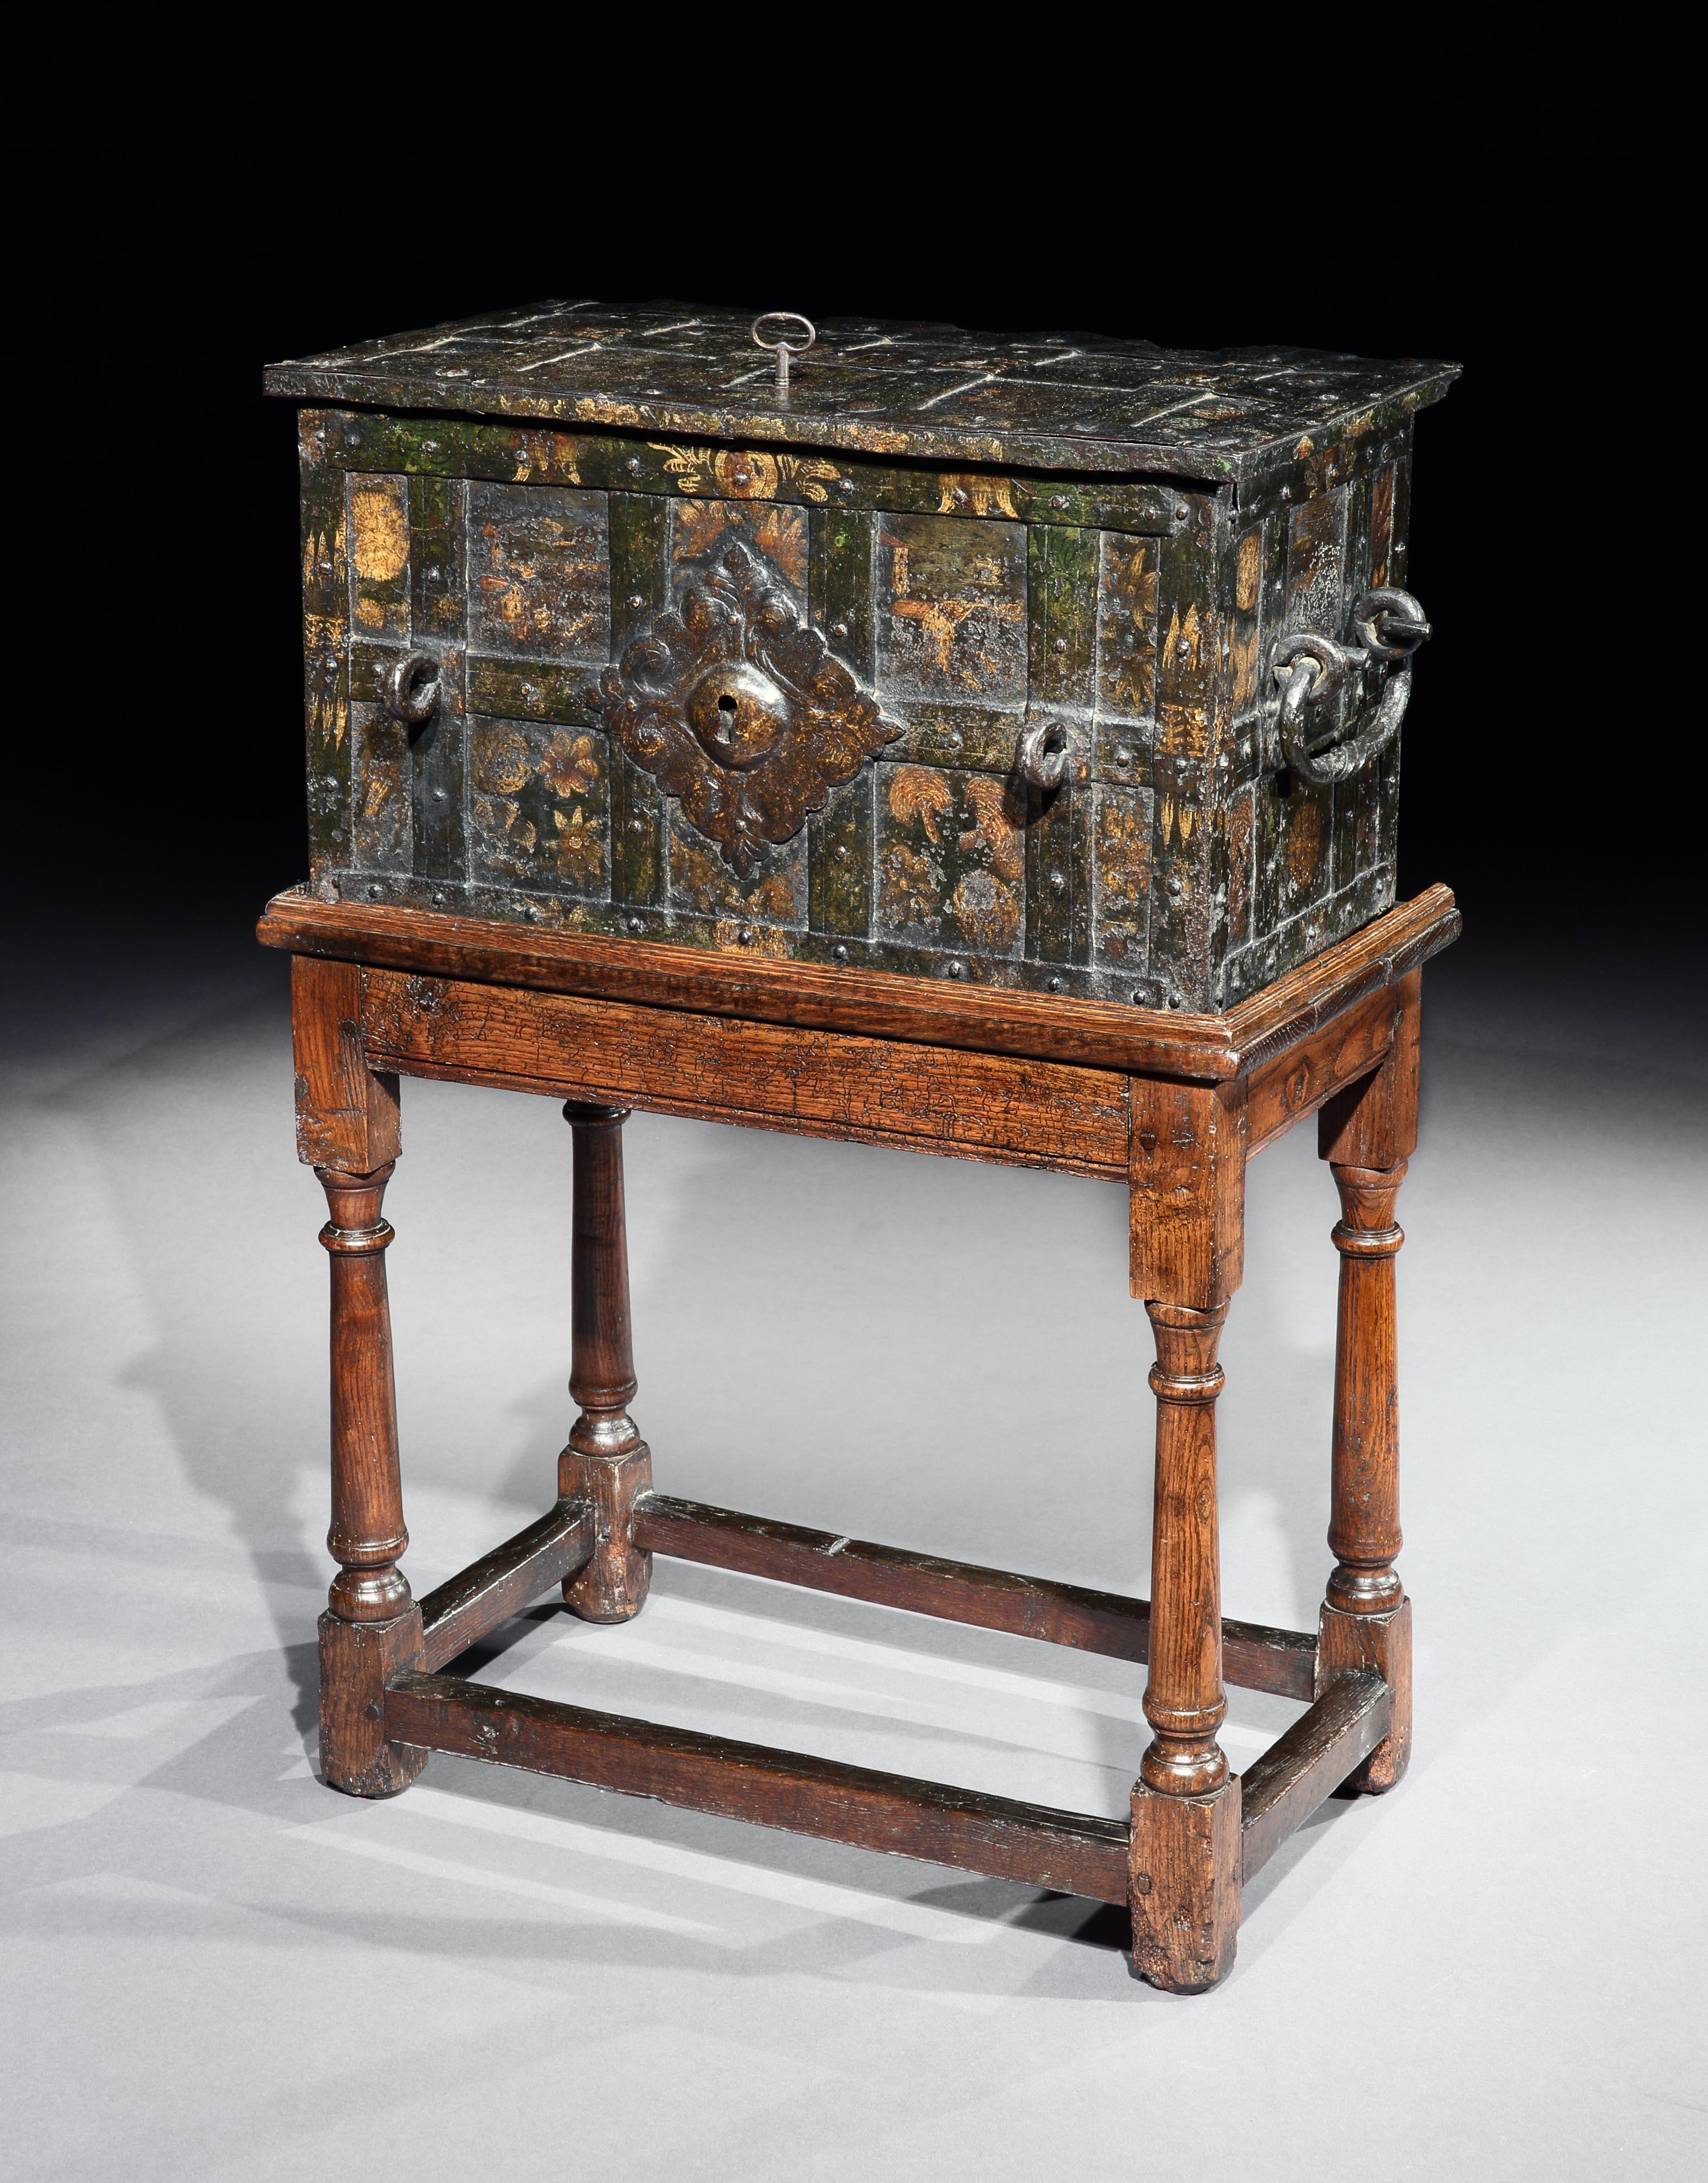 Rare, small, late-Renaissance, Nuremberg, iron, 'armada box', strongbox or travelling safe with its original, naïve, painted decoration

This is a rare, small, example of these characterful, early models of transportable safes. The much larger